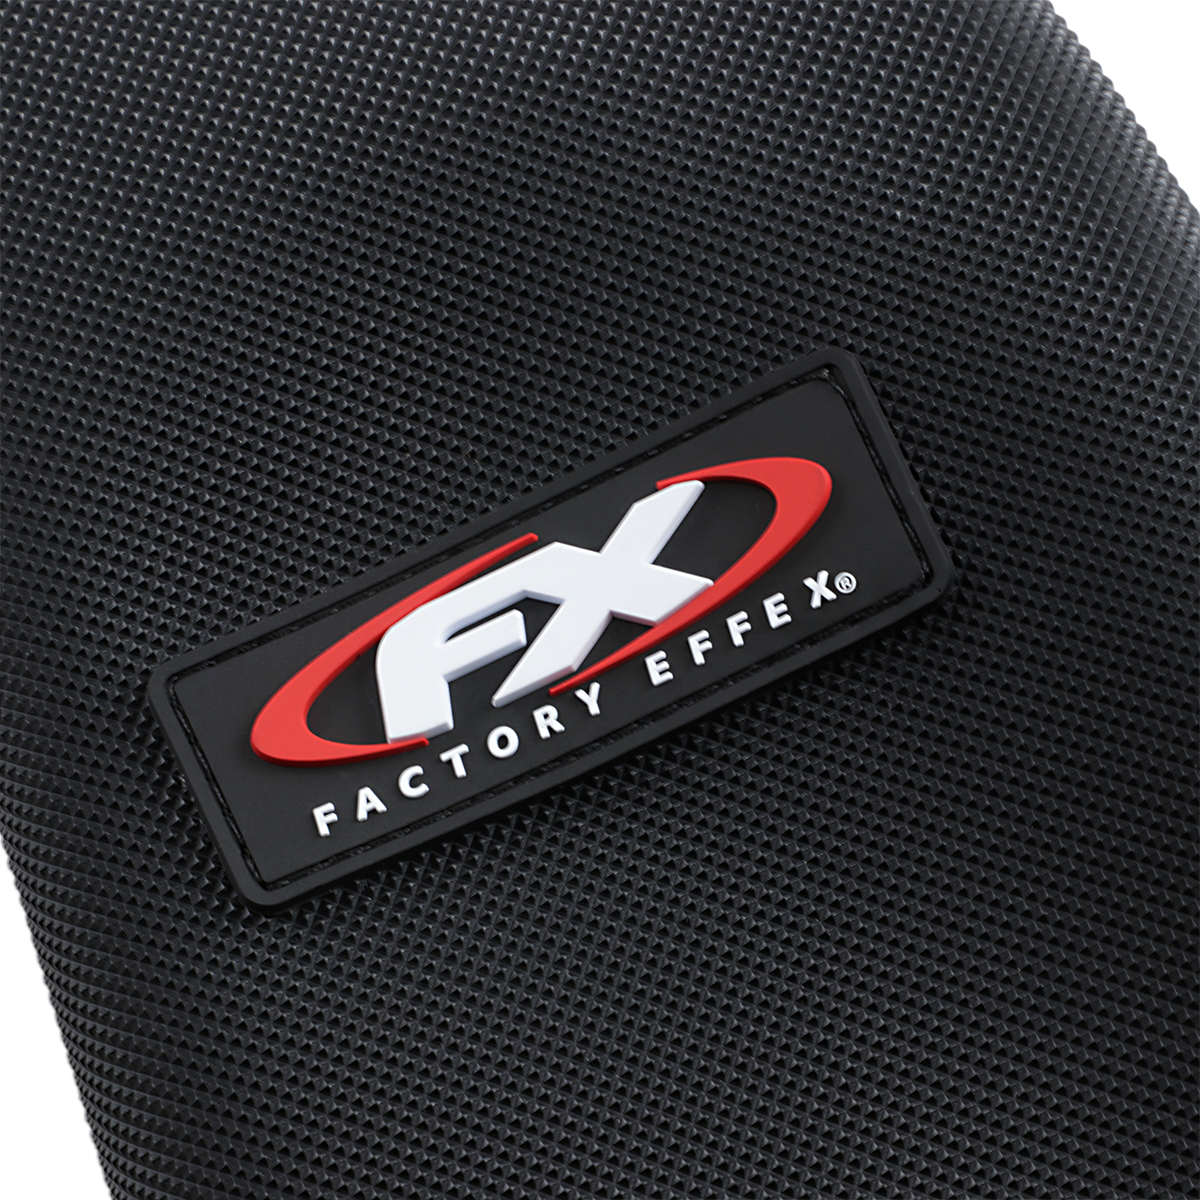 FACTORY EFFEX All Grip Seat Cover - SX 85/105 22-24506